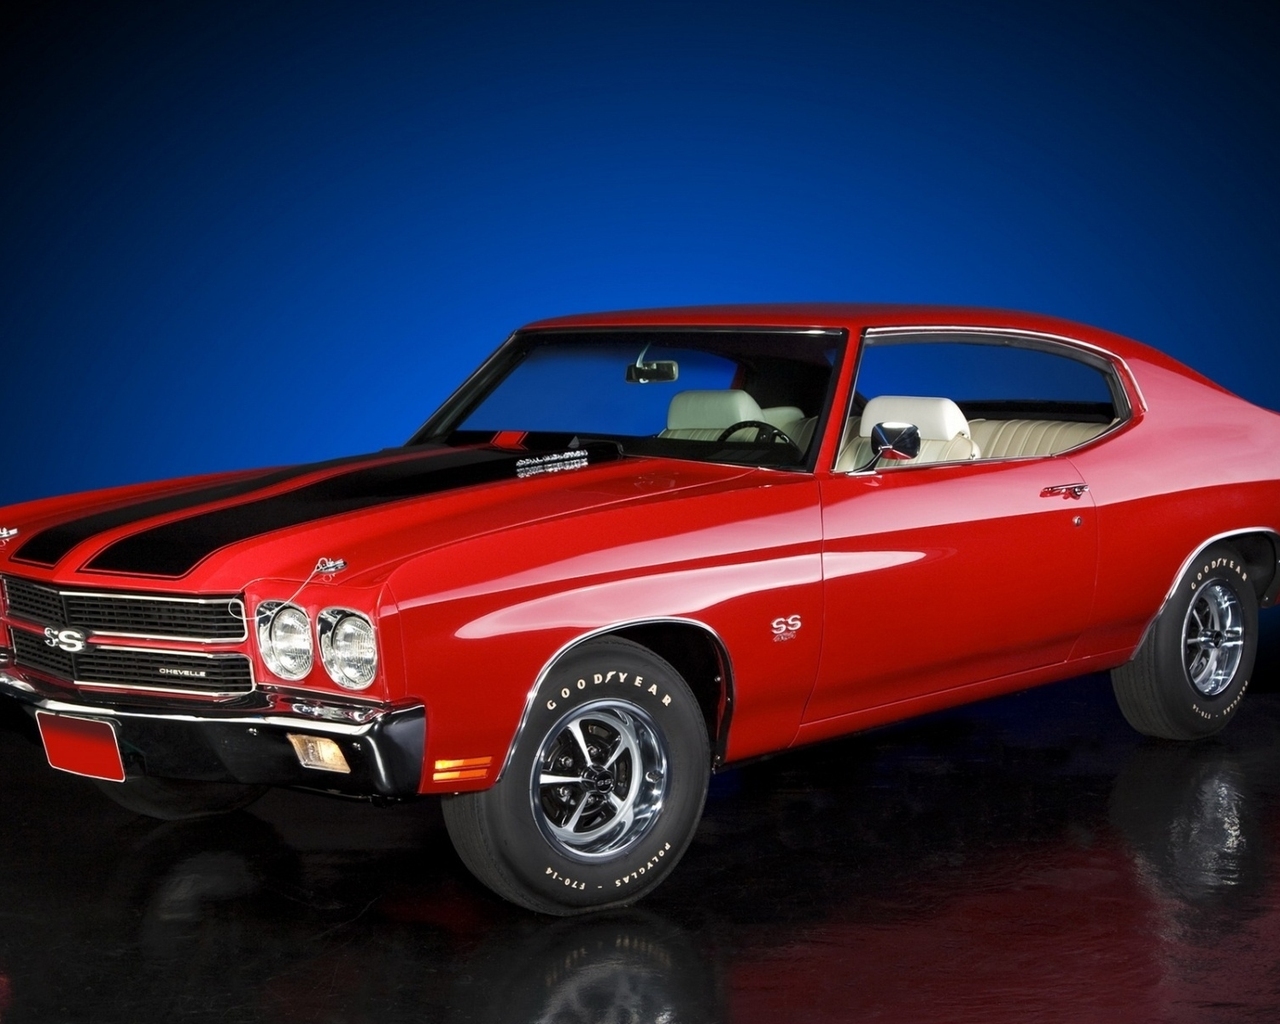 1970 chevelle ss 454 wallpaper Car Tuning